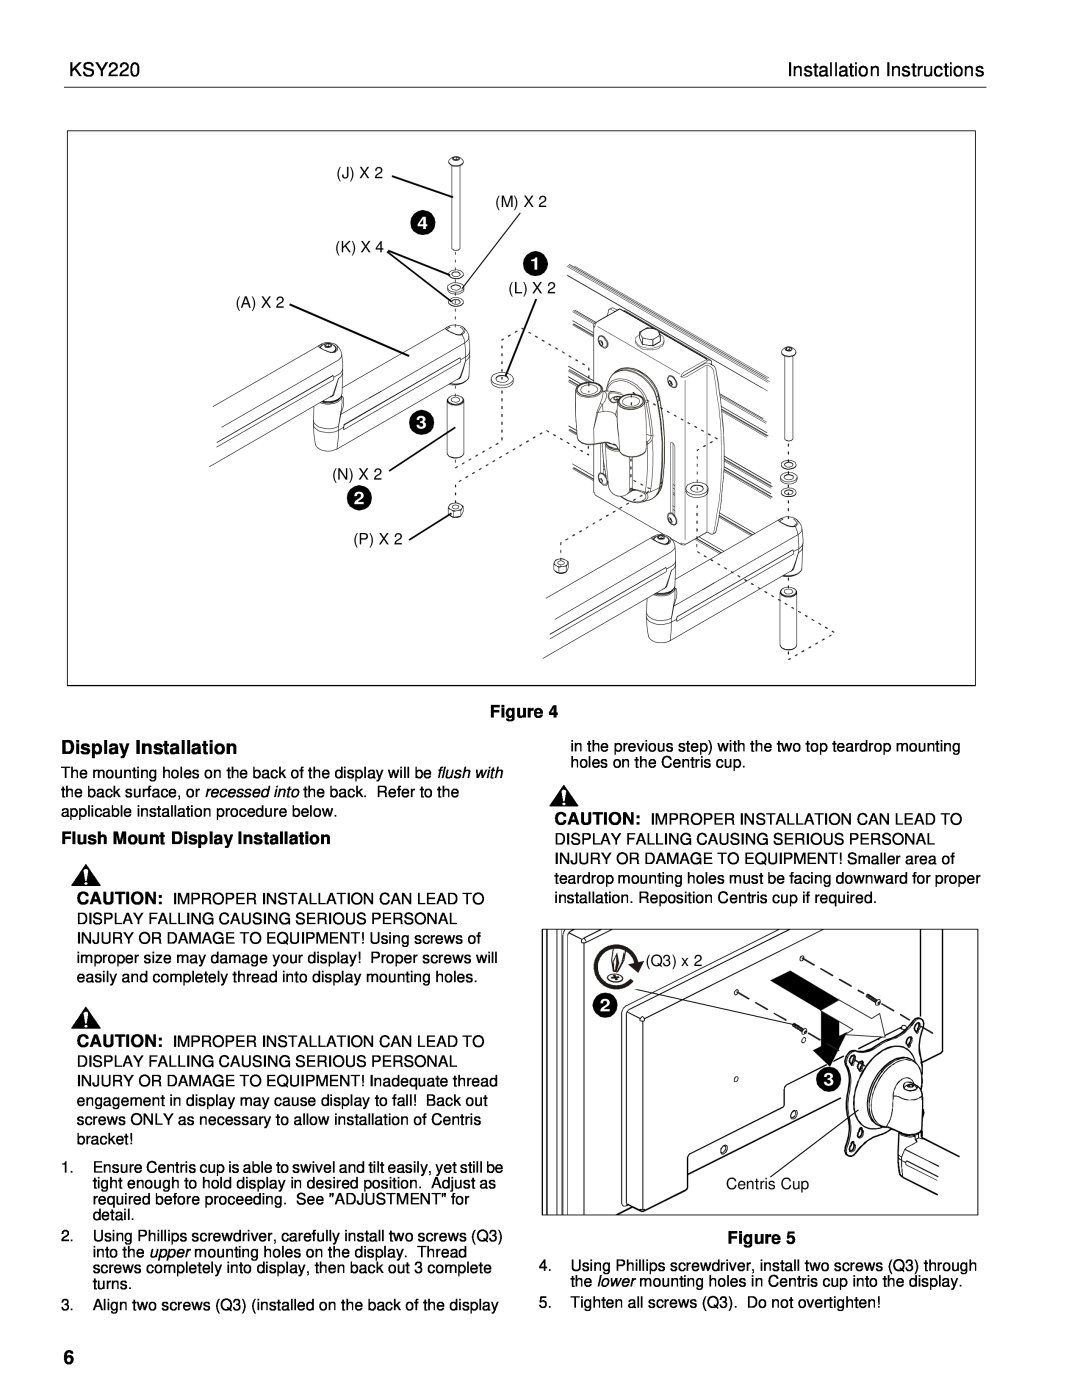 Chief Manufacturing KSY220 installation instructions Flush Mount Display Installation, Installation Instructions 